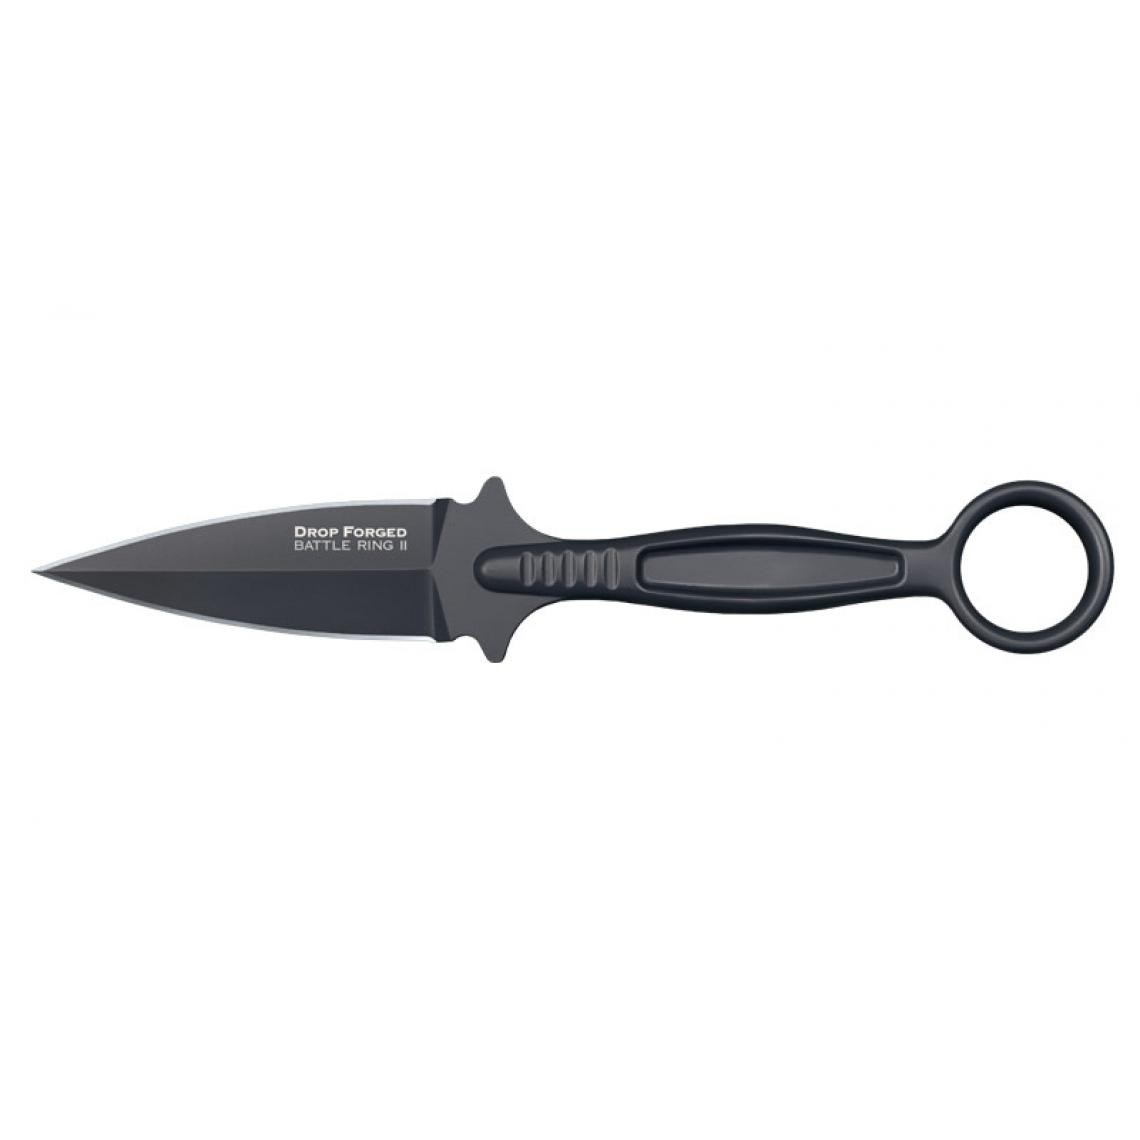 Divers Marques - COLD STEEL - CS36MF - DROP FORGED BATTLE RING II - Outils de coupe